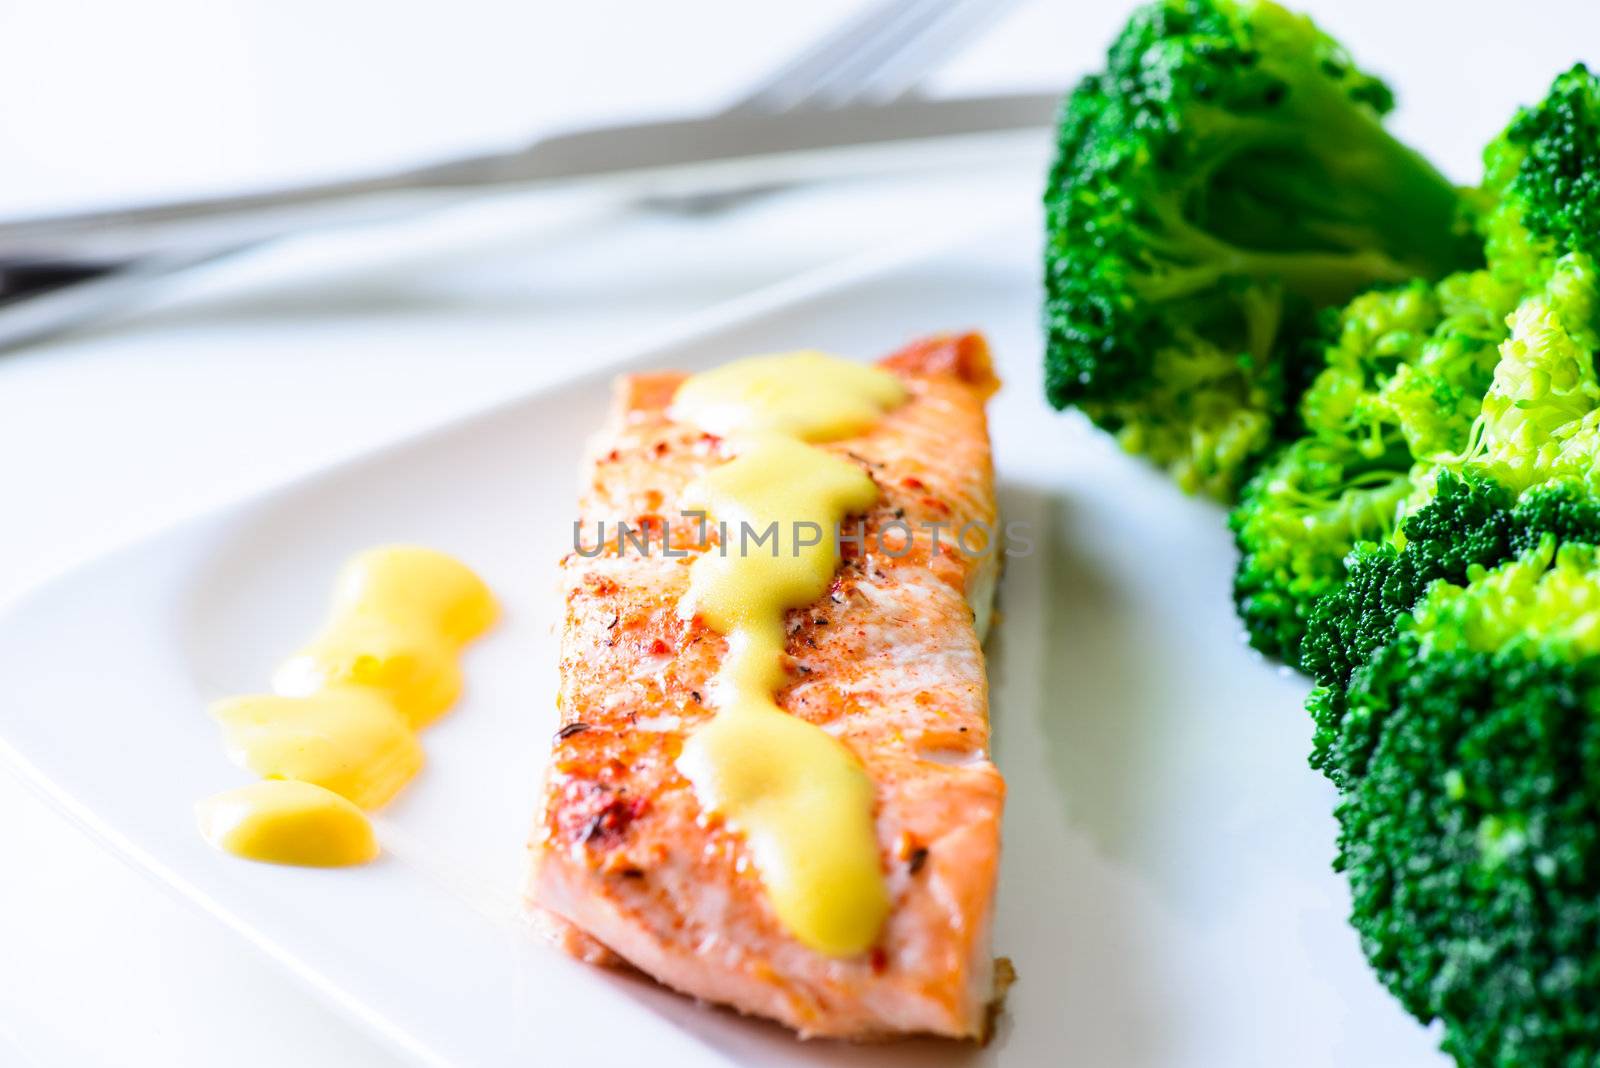 Baked salmon with hollandaise sauce and broccoli on plate